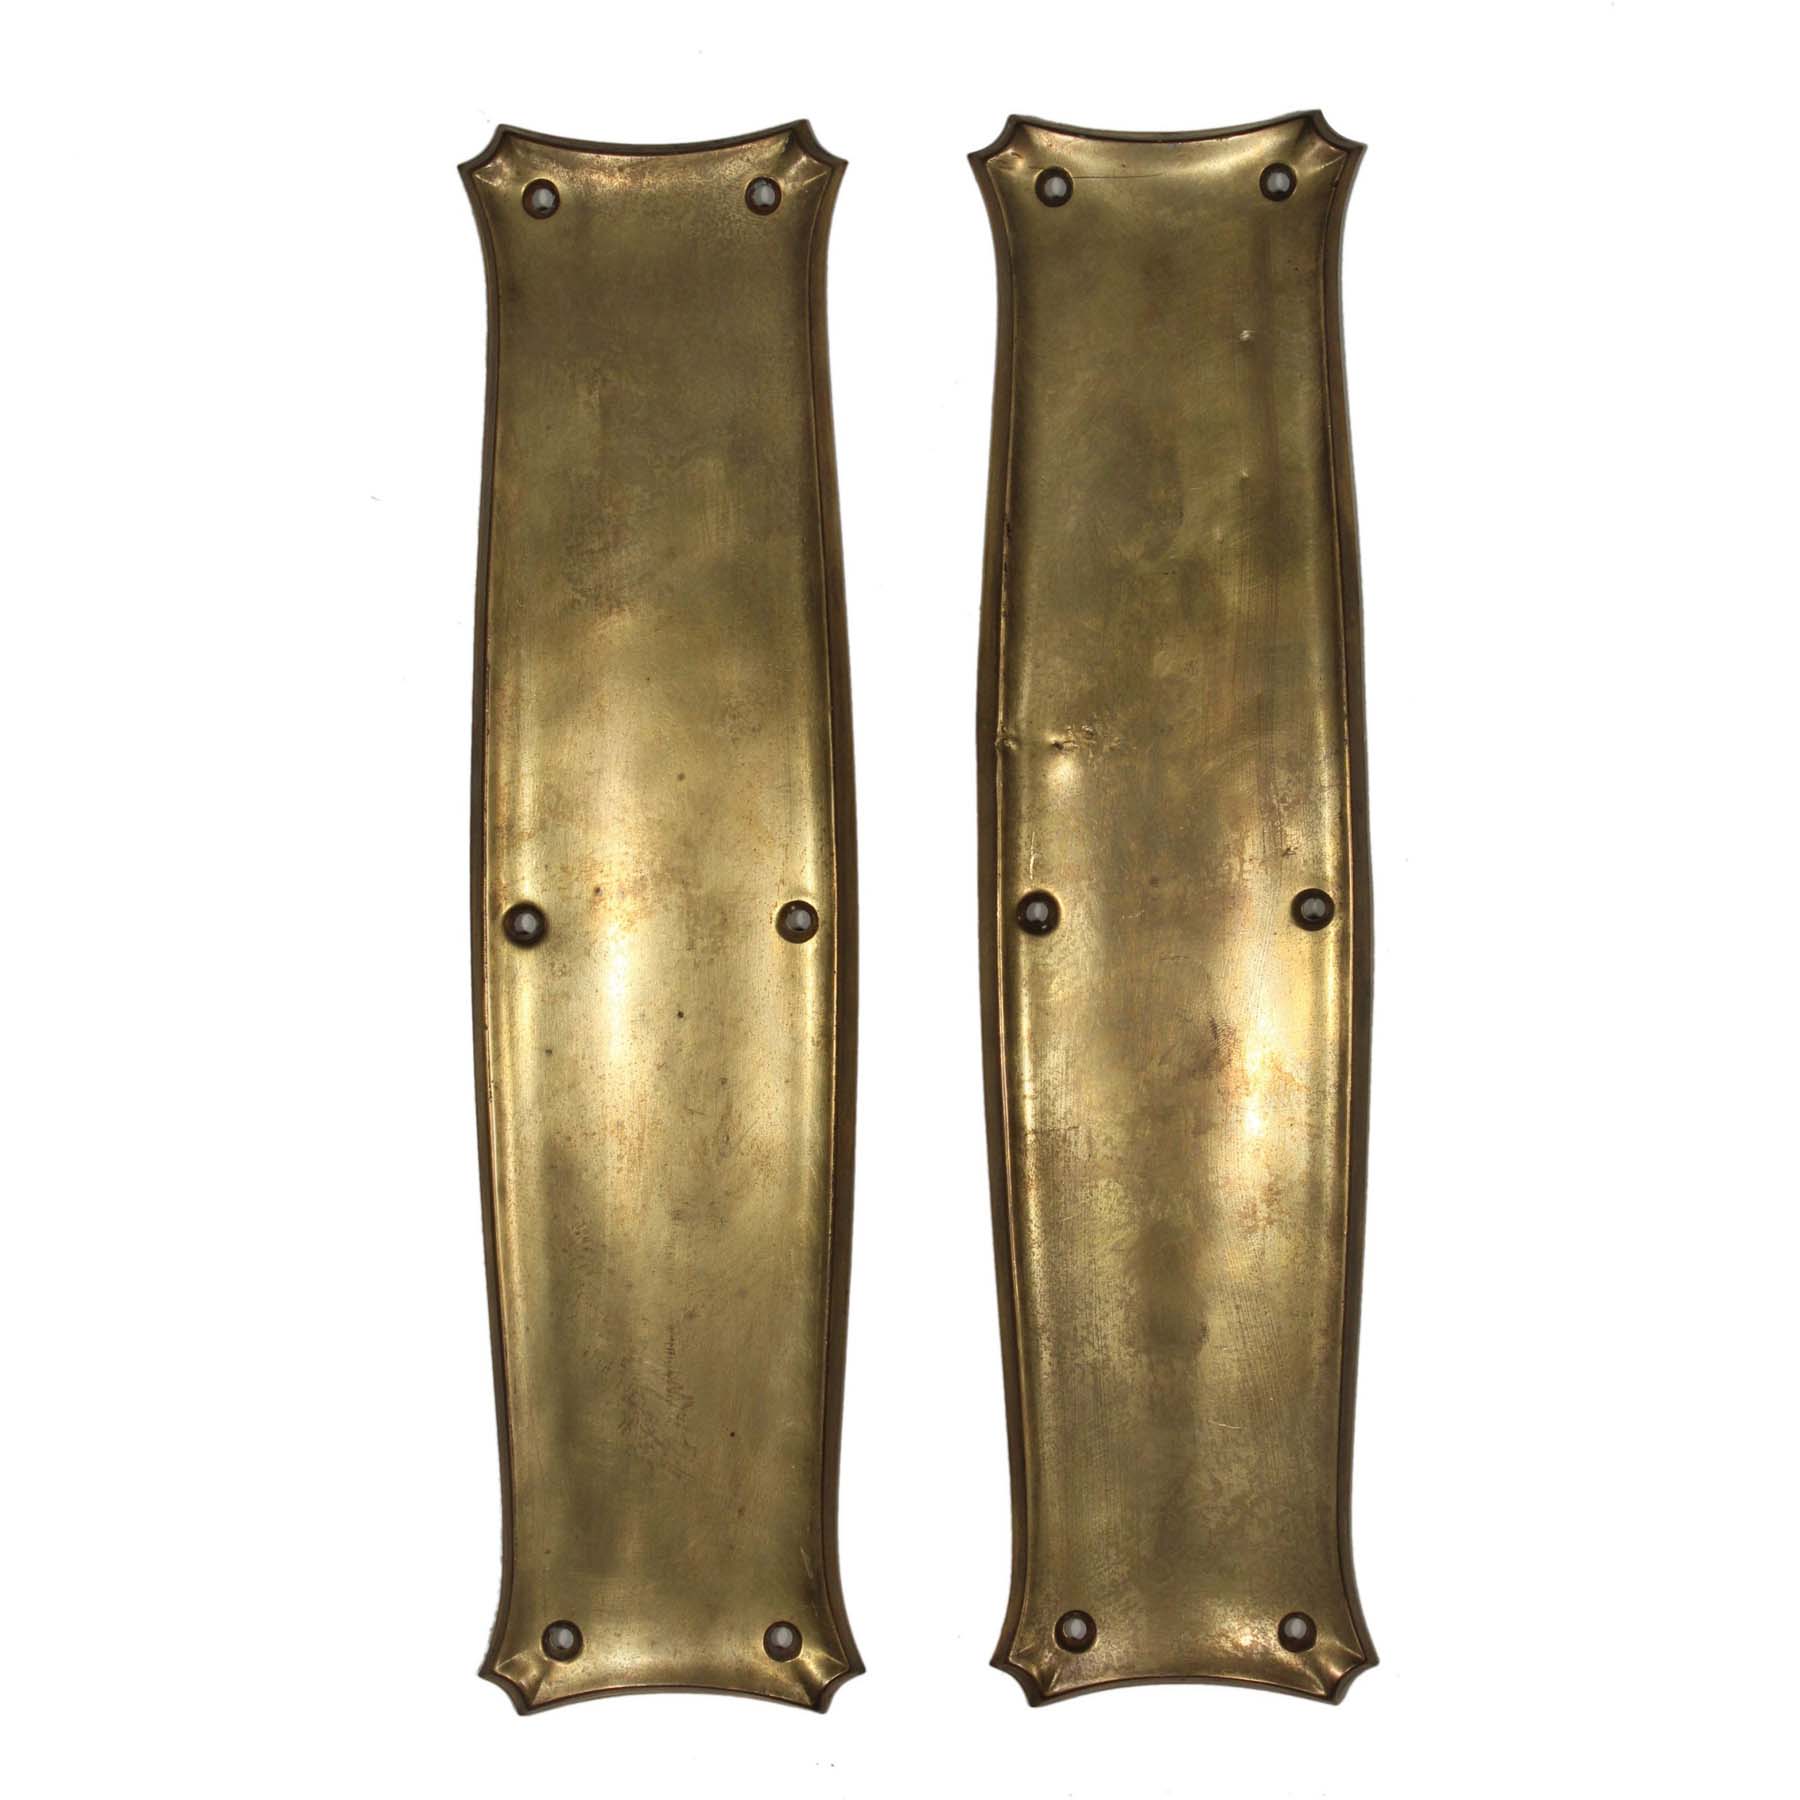 SOLD Antique Brass Push Plates, Early 1900s-0